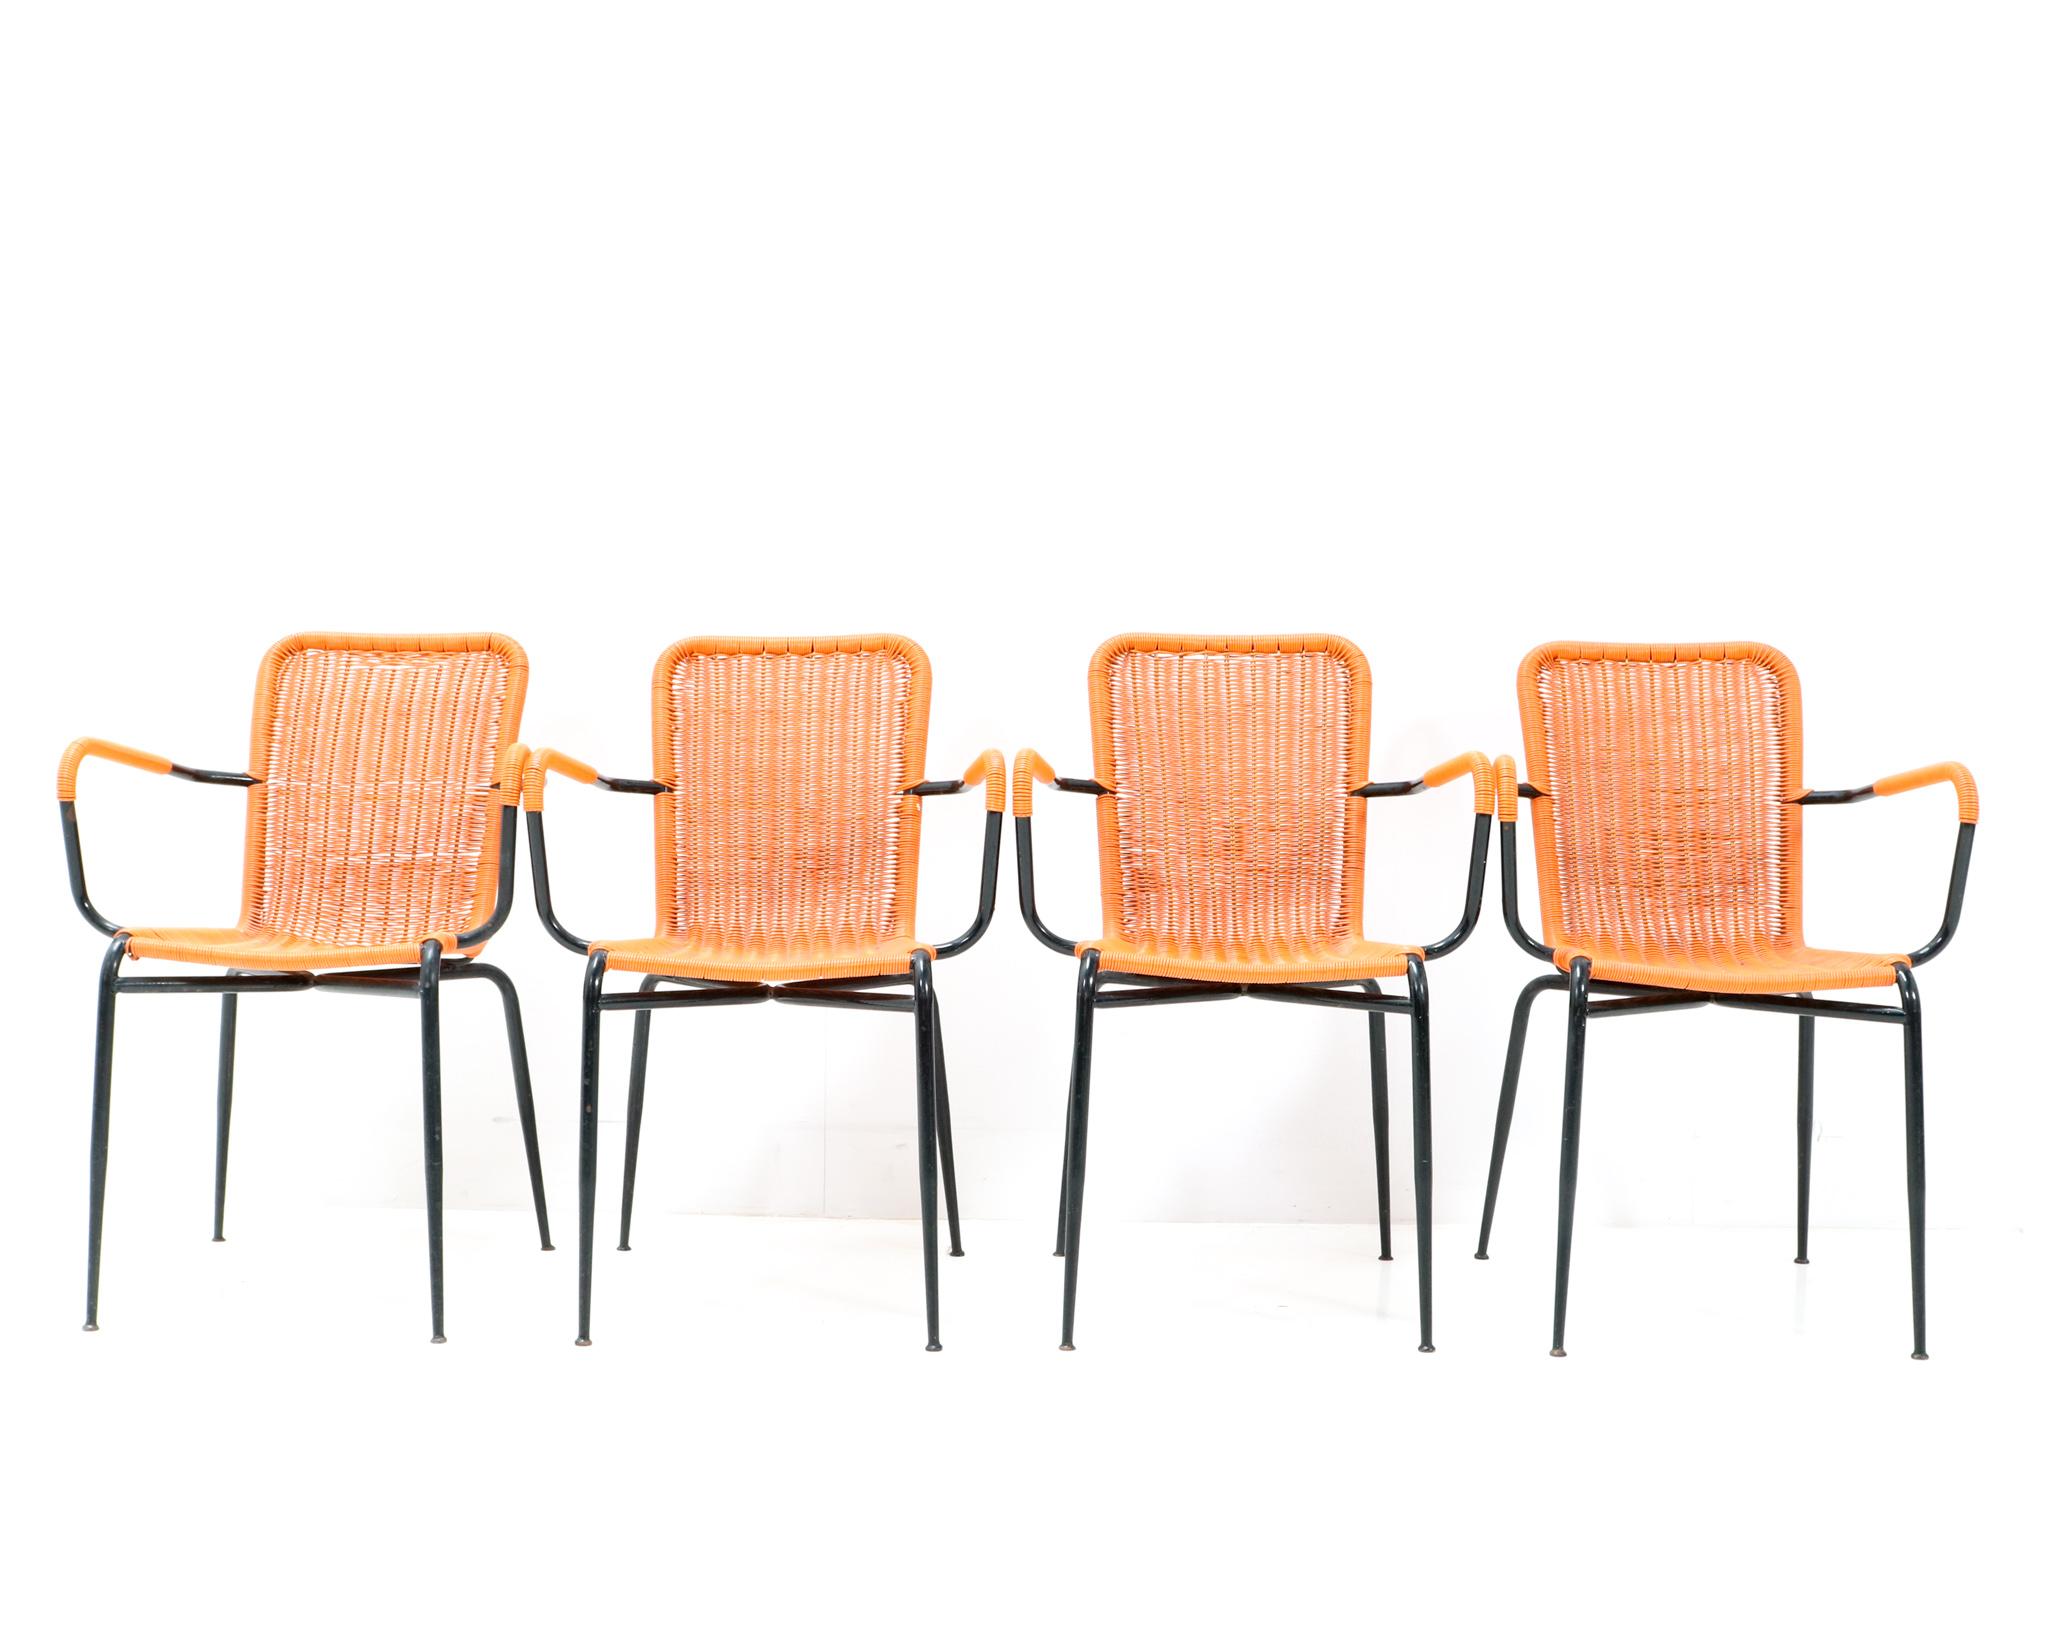 Stunning set of four outdoor Mid-Century Modern armchairs.
Striking Italian design from the 1960s.
Original black lacquered metal frames with the seats and armrests upholstered in
original orange plastic fabric.
This wonderful and elegant set of